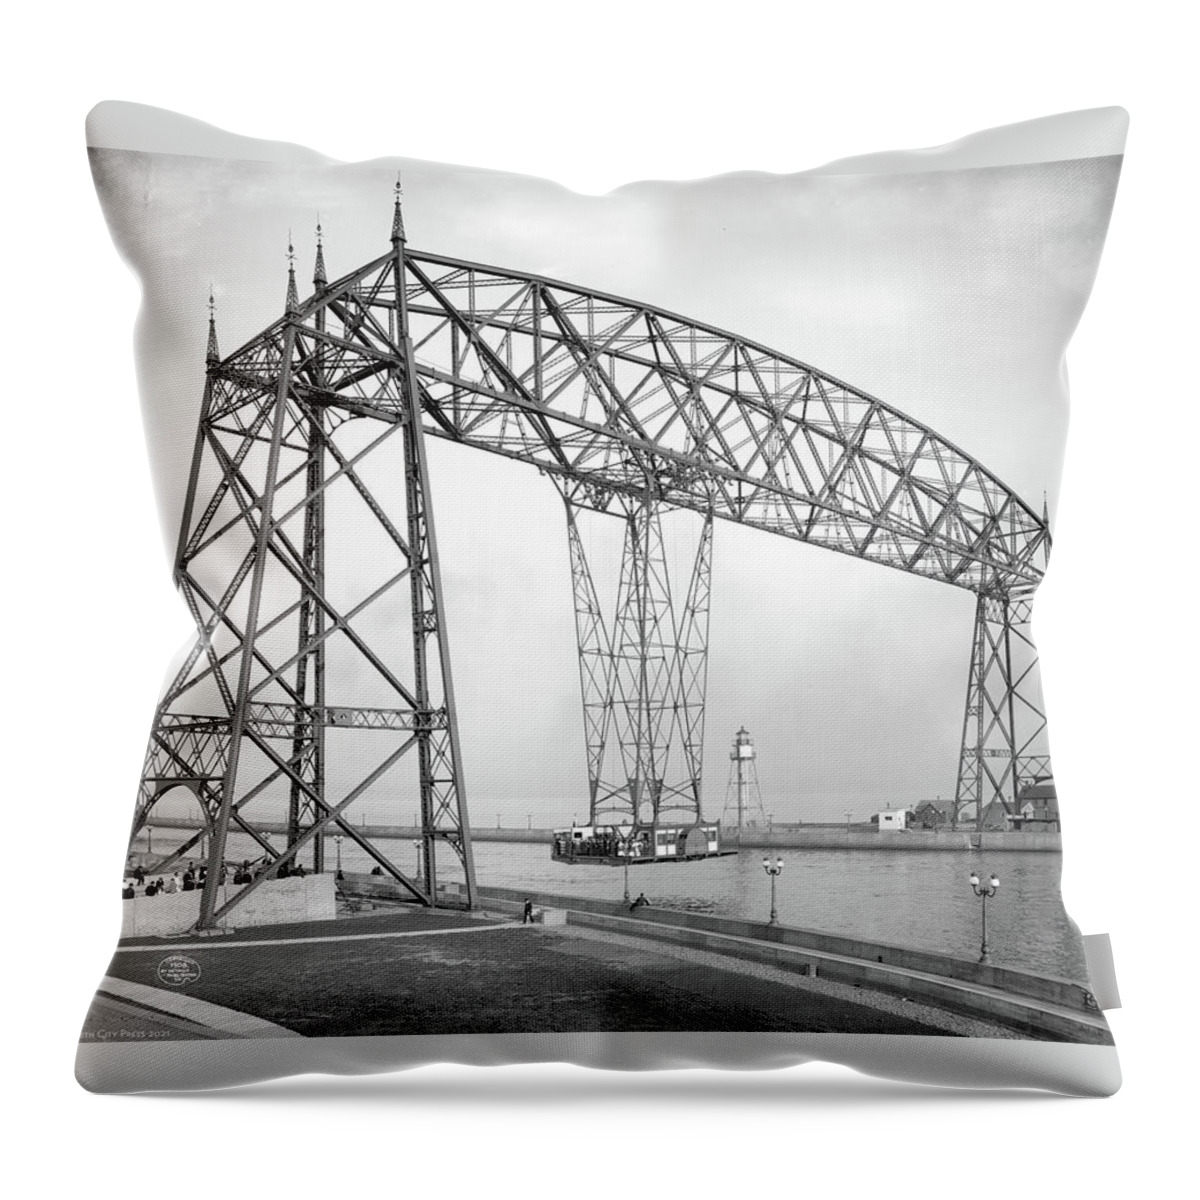 Duluth Throw Pillow featuring the photograph Aerial Transfer Bridge Bridge, 1906 by Detroit Publishing Co